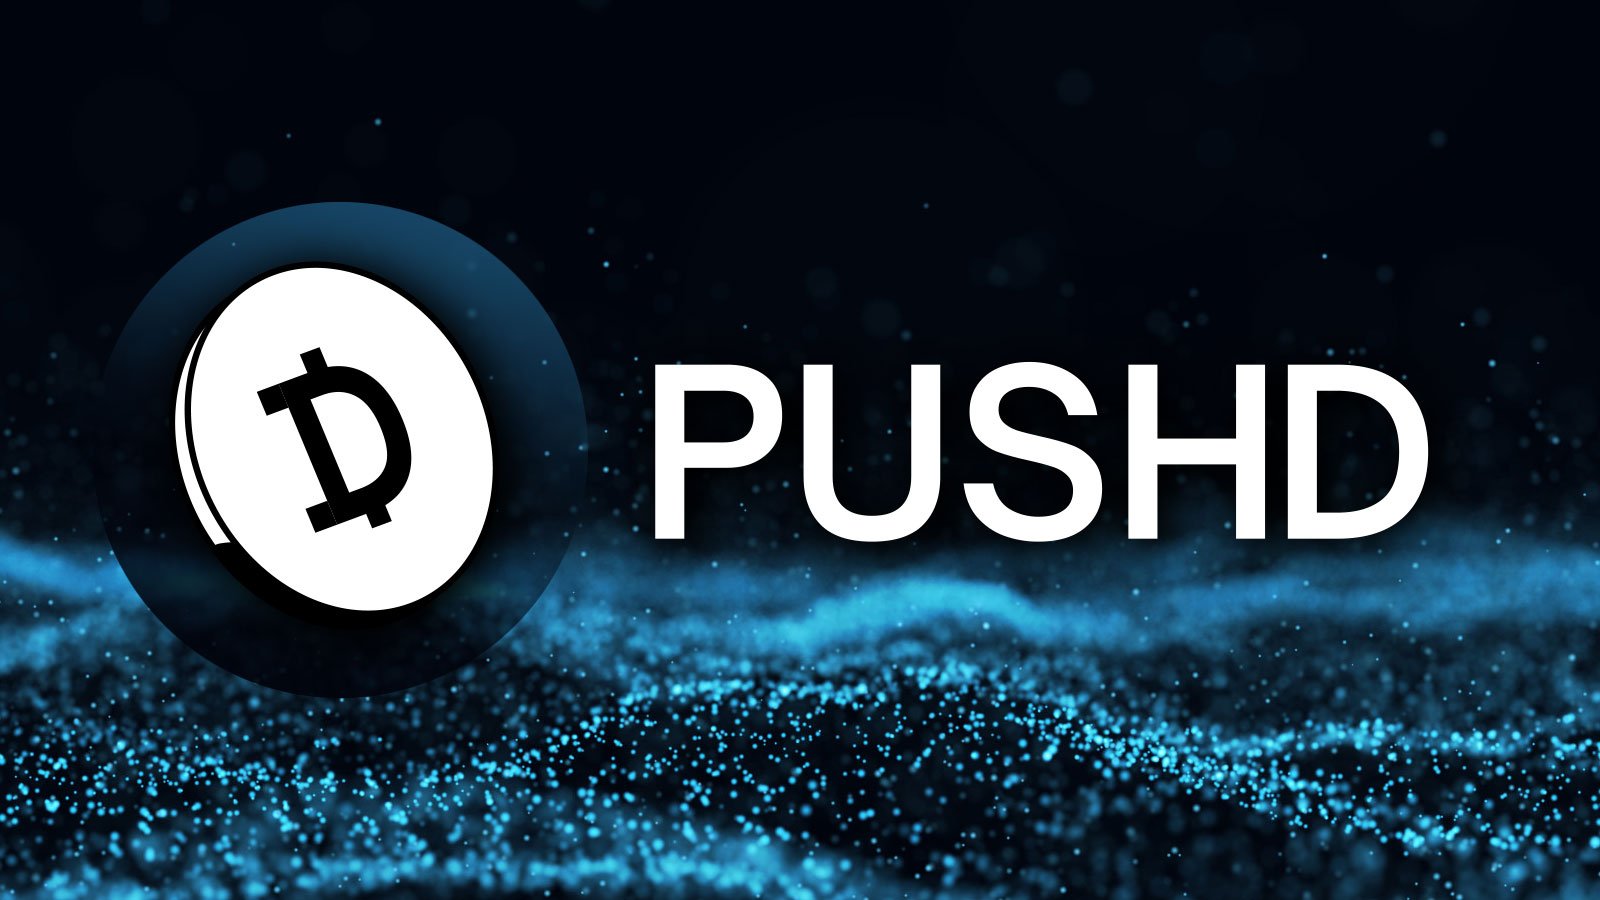 New Pushd (PUSHD) Pre-Sale Welcomes Investors in January while Injective (INJ) and Hedera (HBAR) Top Altcoins Recover Fast